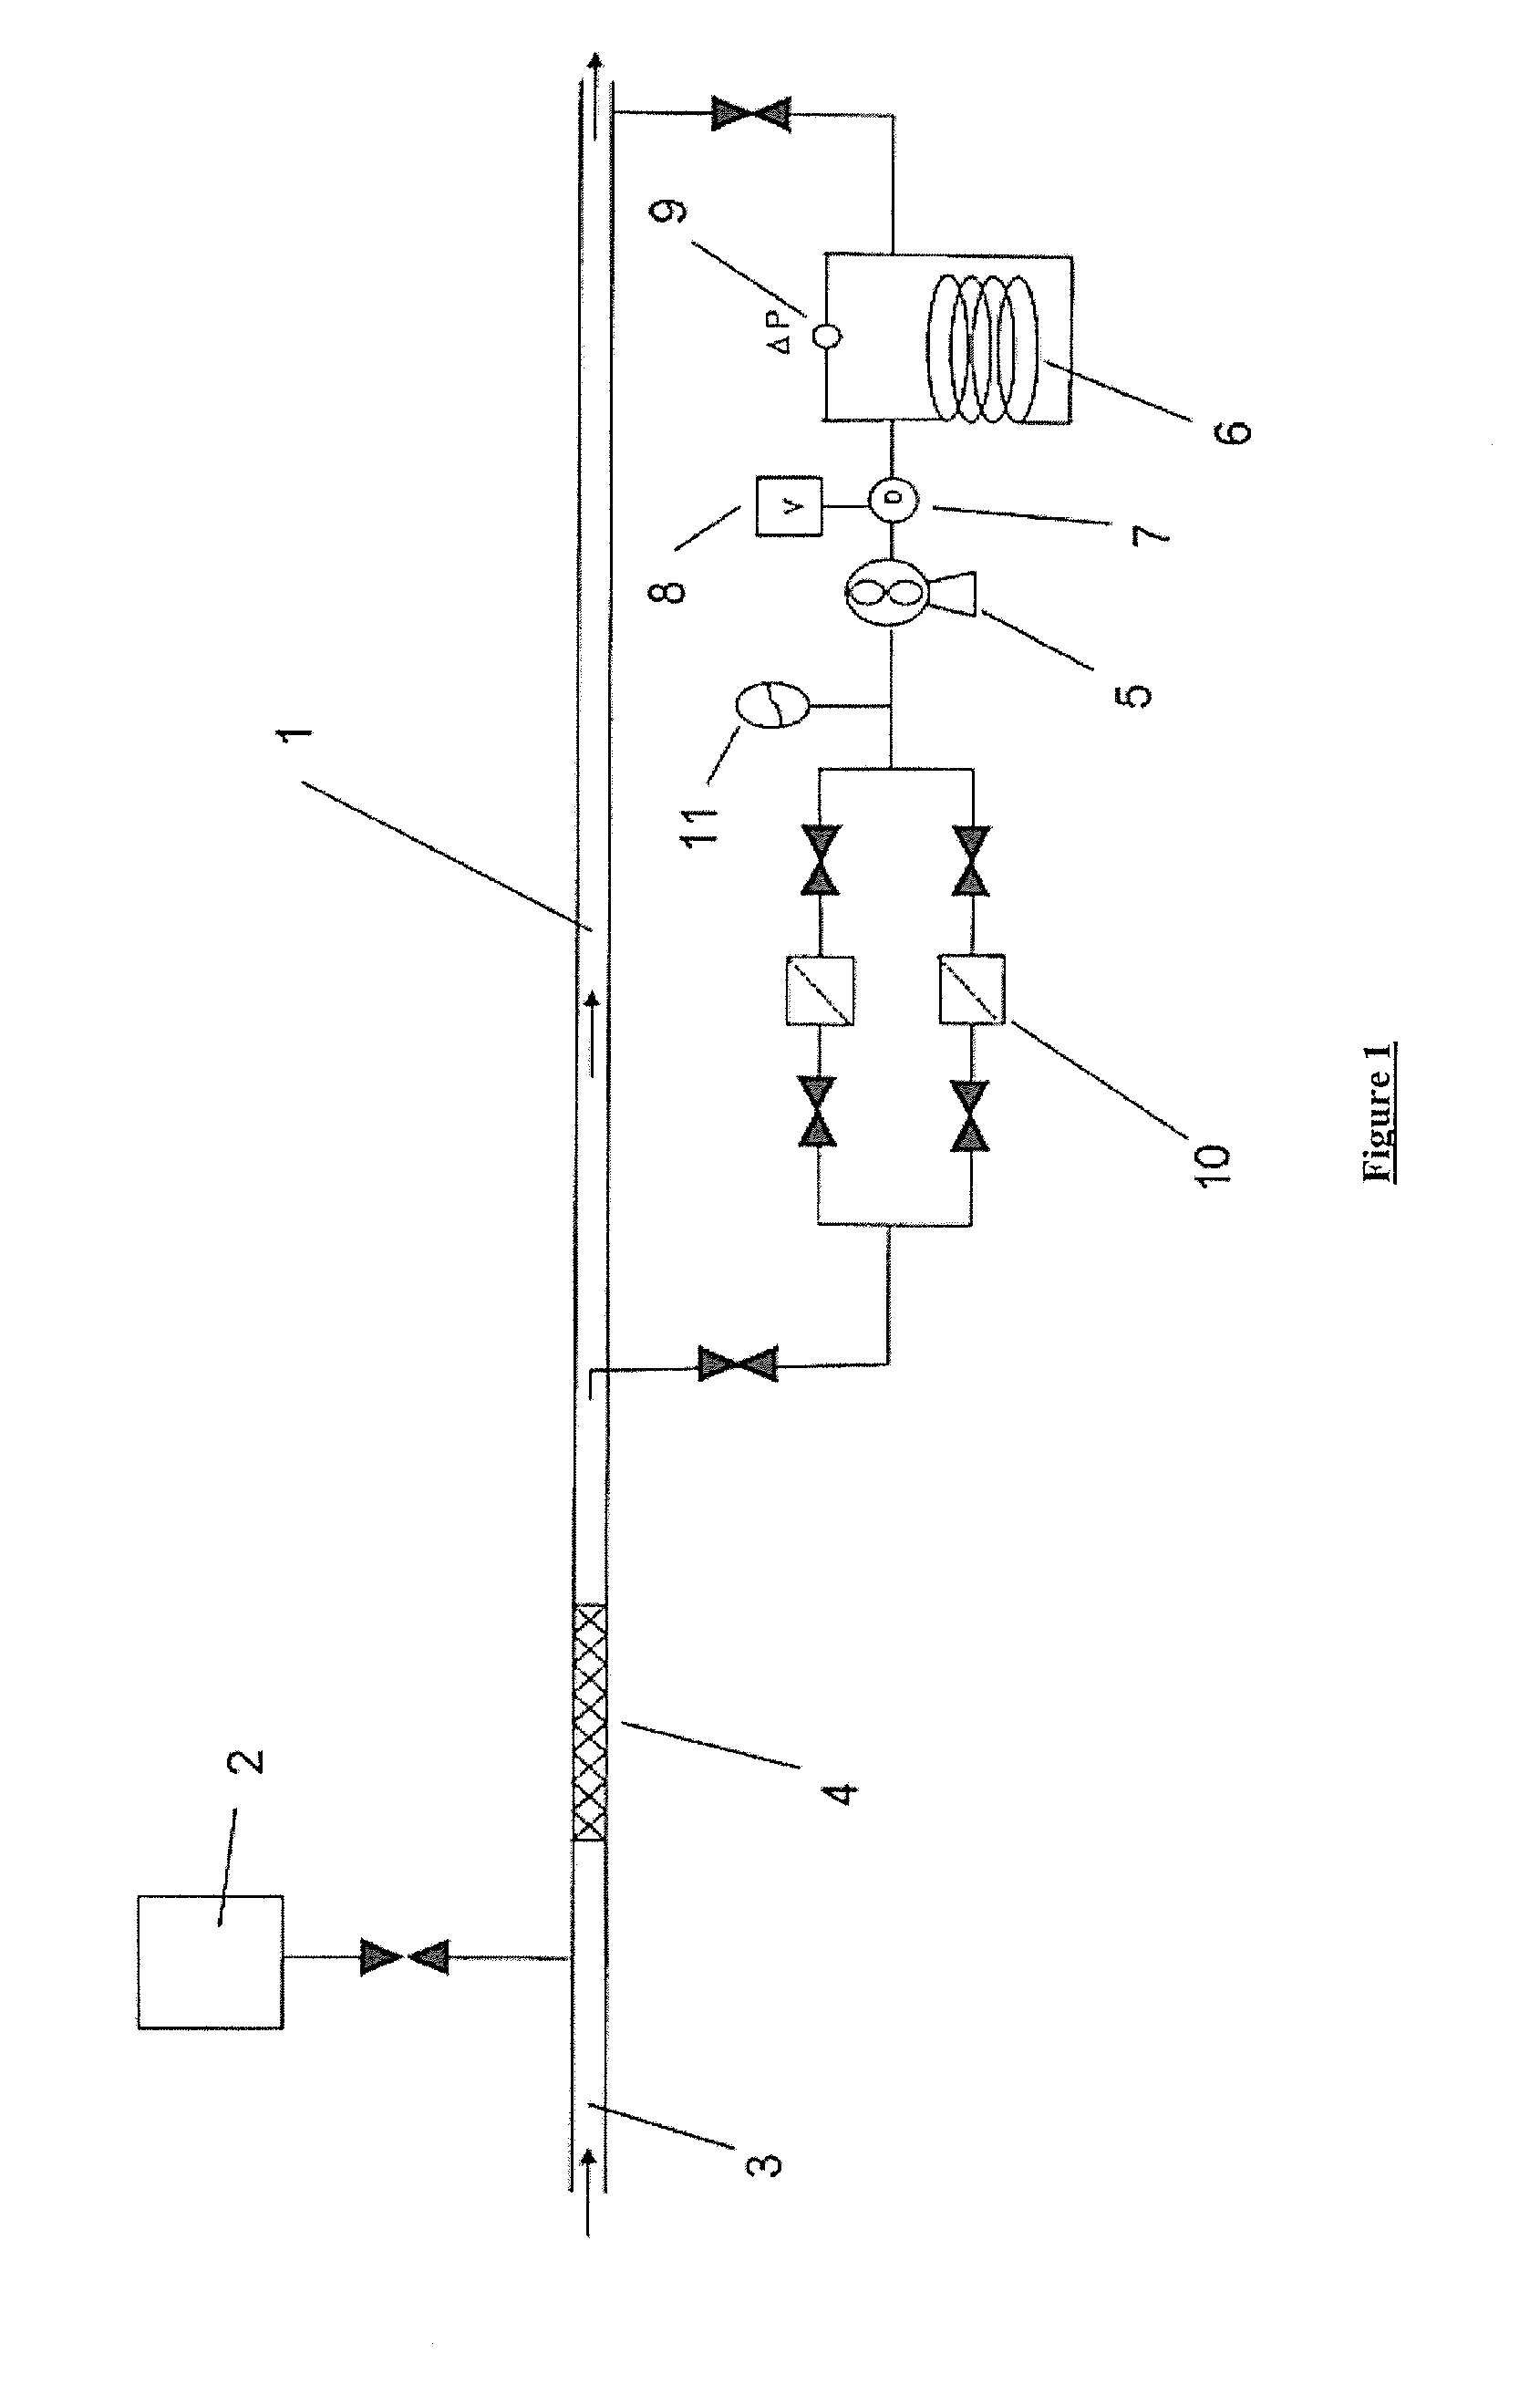 Device for measuring and controlling on-line viscosity at high pressure